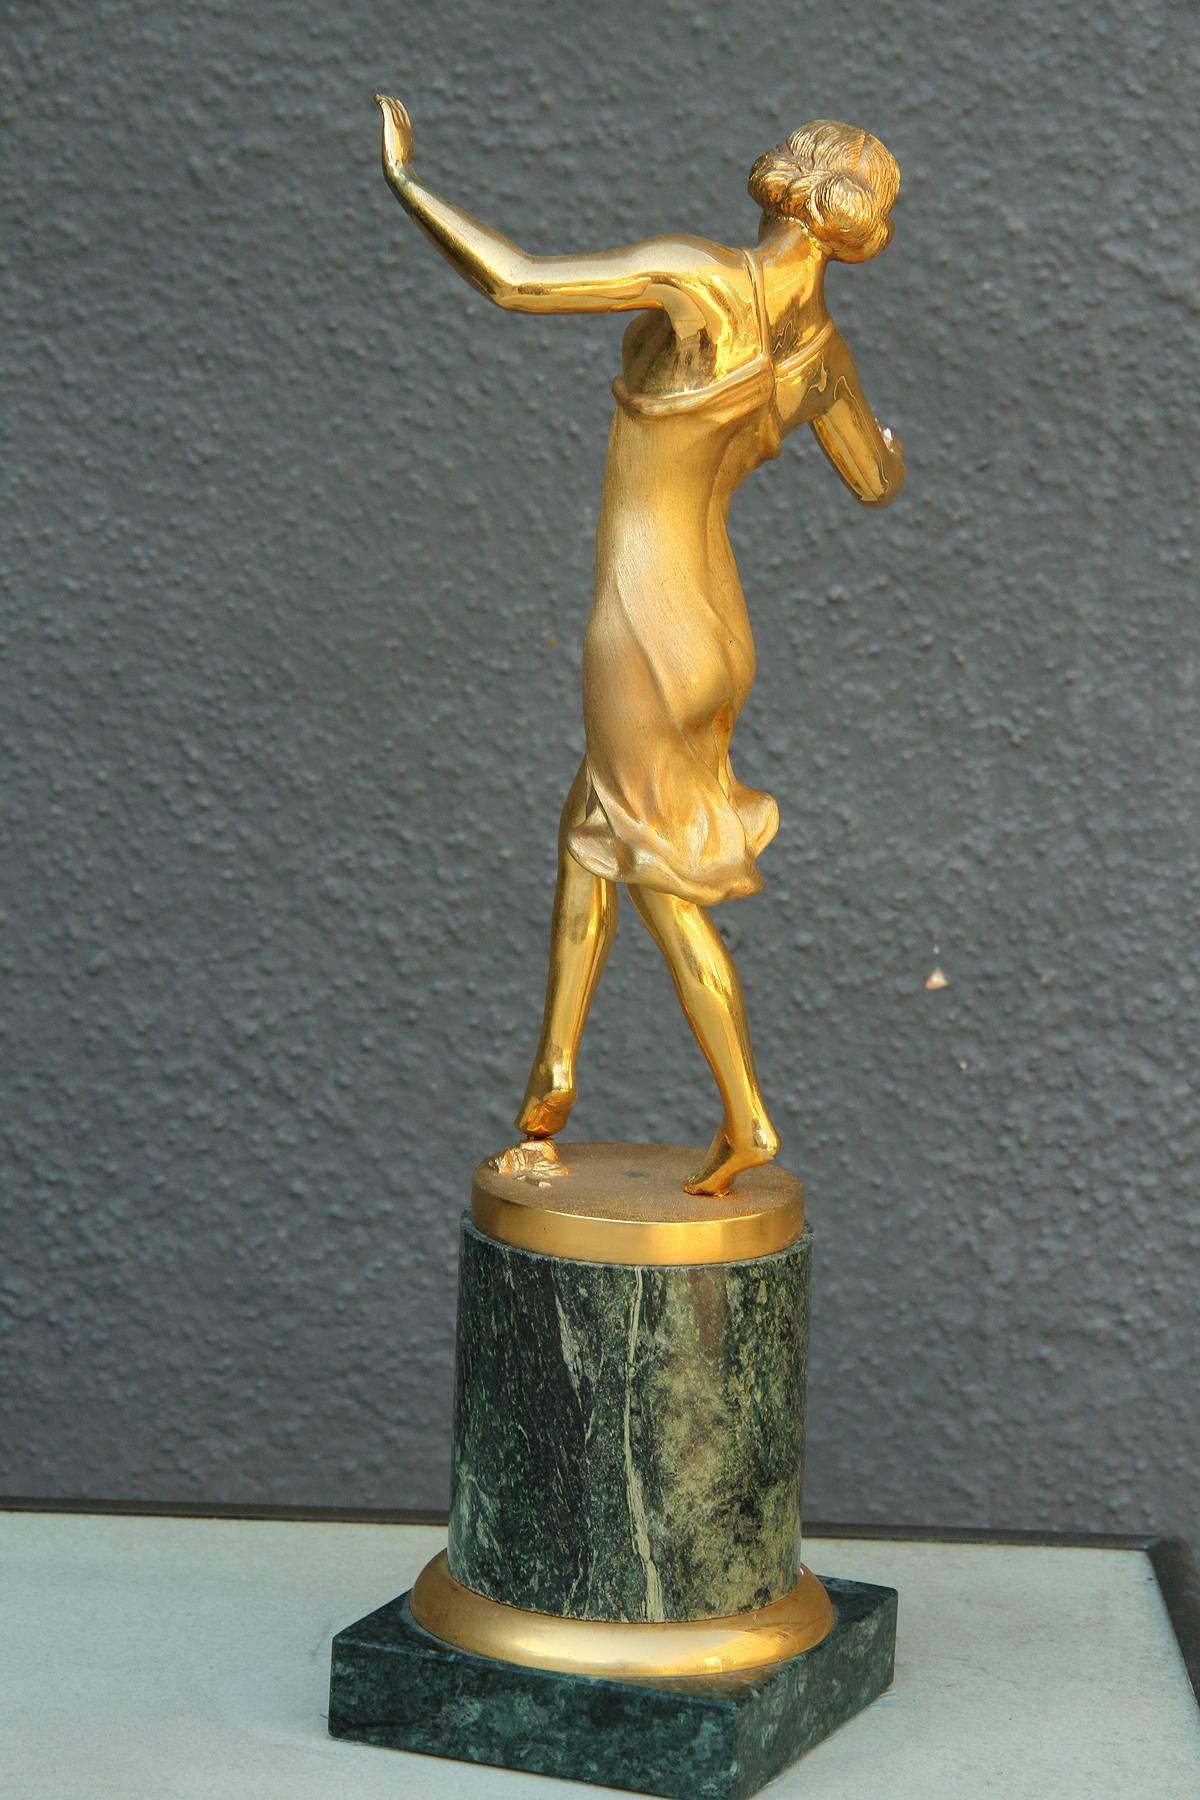 Very elegant gilt bronze sculpture, France, 1930.
Two different tones of finish, mat and shiny, accentuate the elegance of this dancer.
Base in green Empire marble.
Measure: H 11